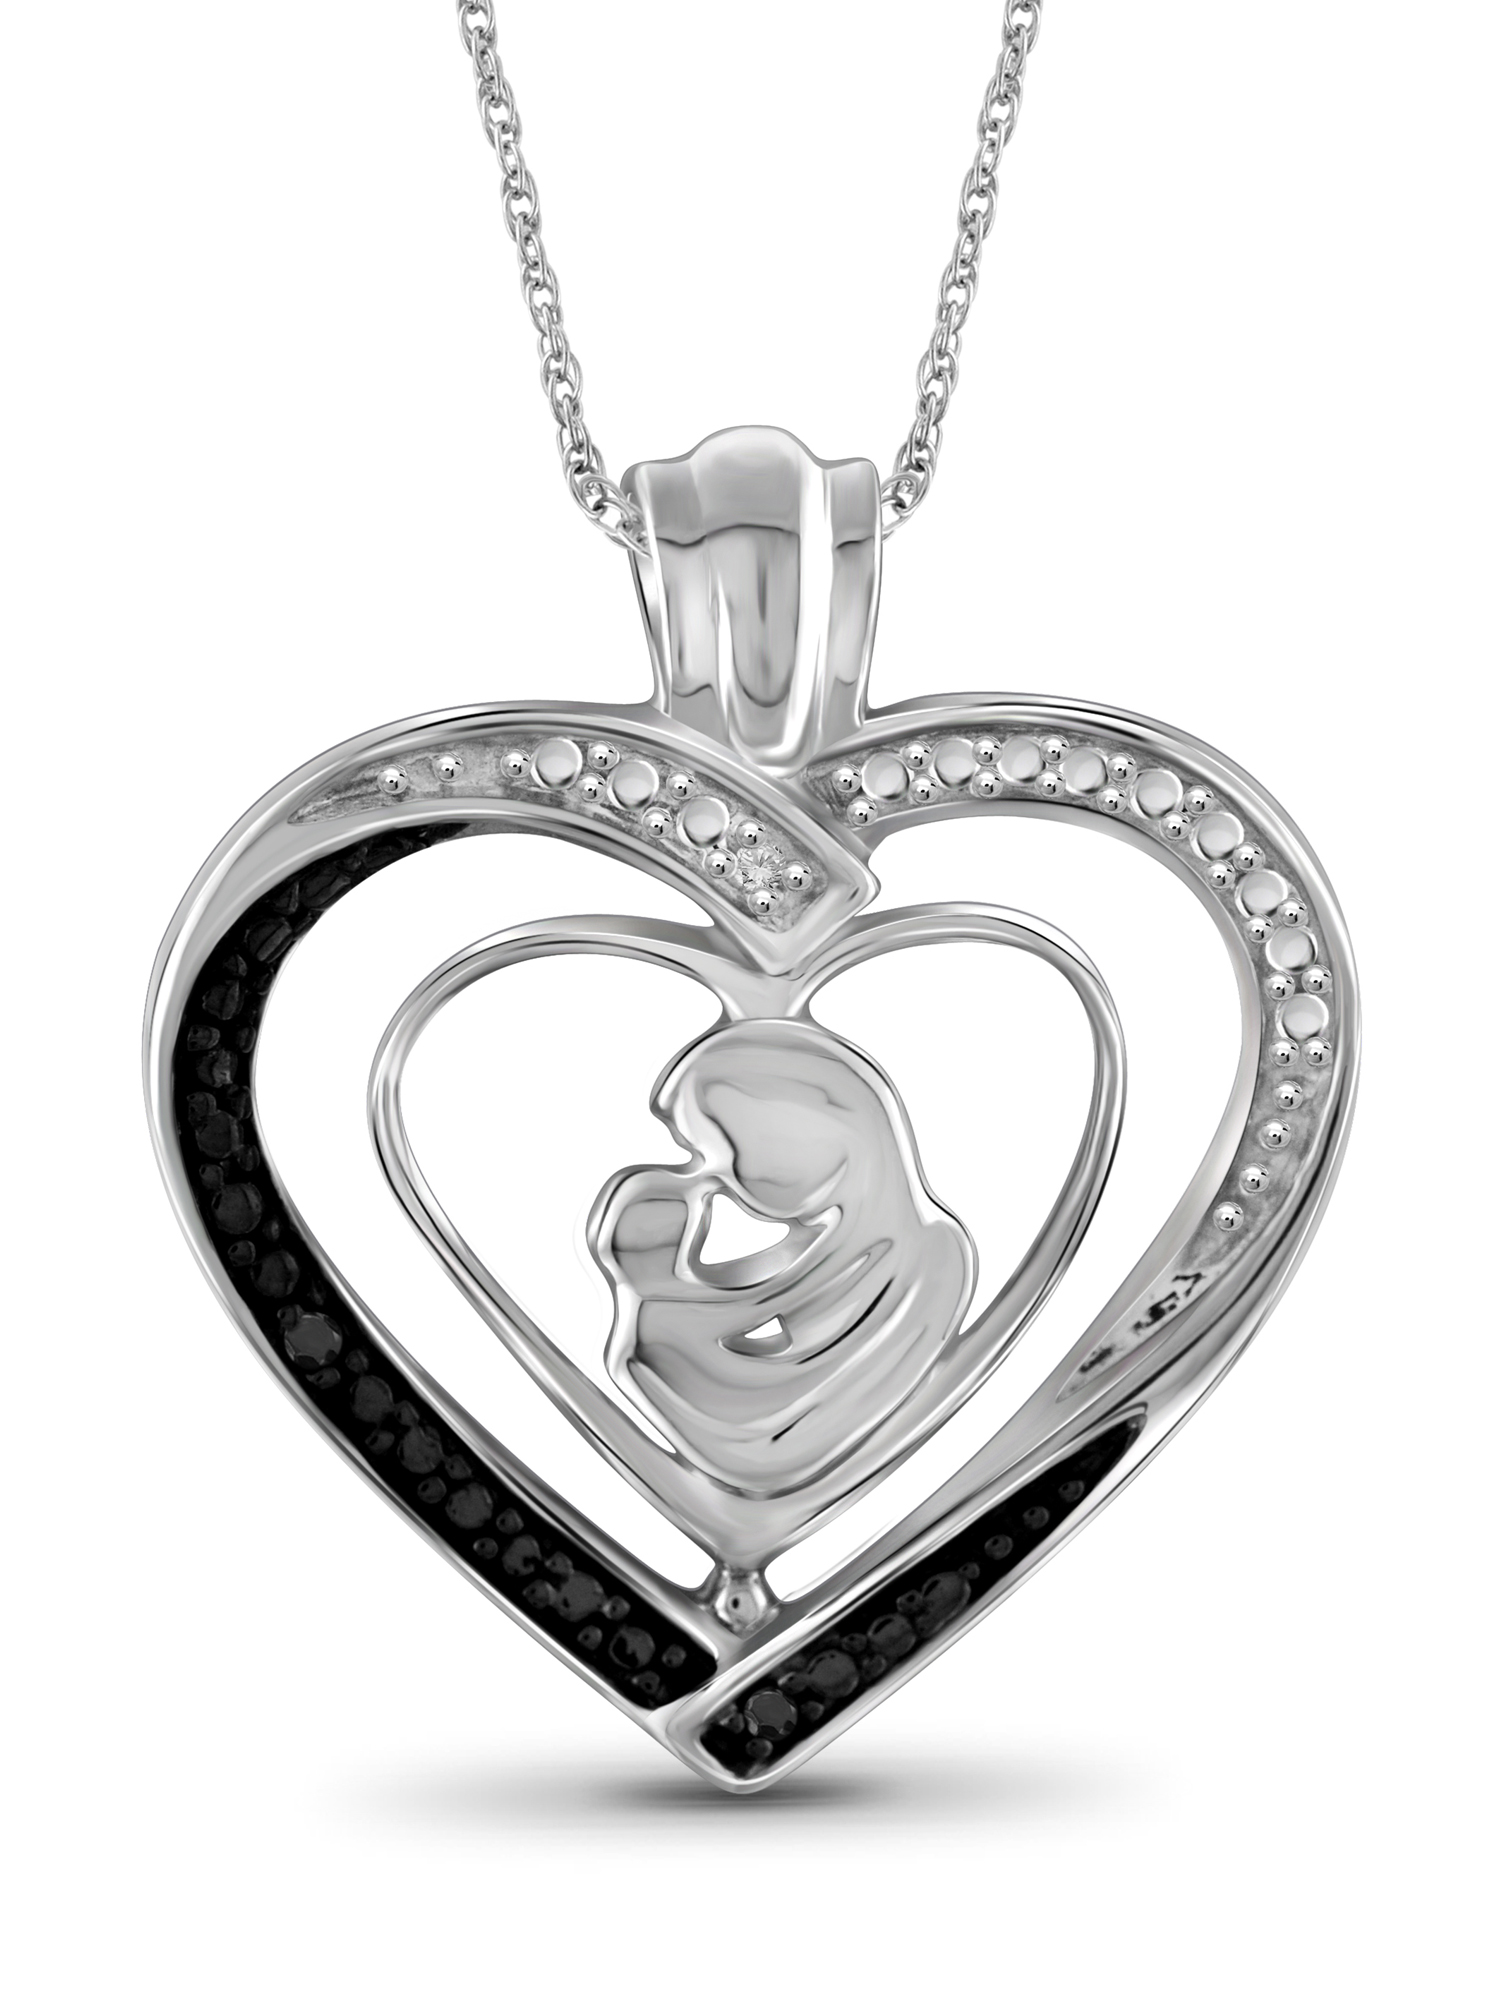 JewelersClub Mom Necklace 0.925 Sterling Silver Necklace for Women – Beautiful Accent Black & White Diamonds + 0.925 Sterling Silver Mother Daughter Necklace – Mothers Day Gifts Necklaces for Women - image 1 of 5